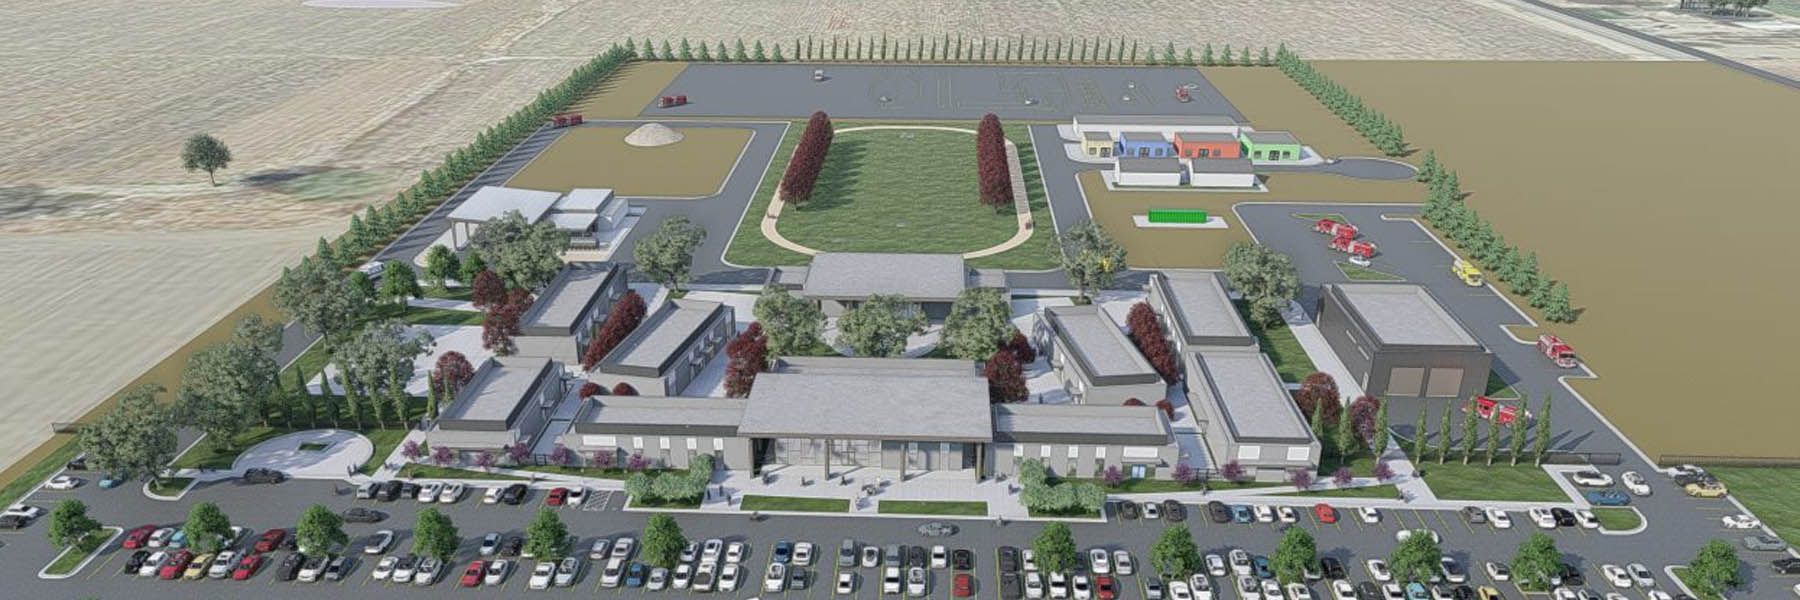 Rendering of the First Responders Campus